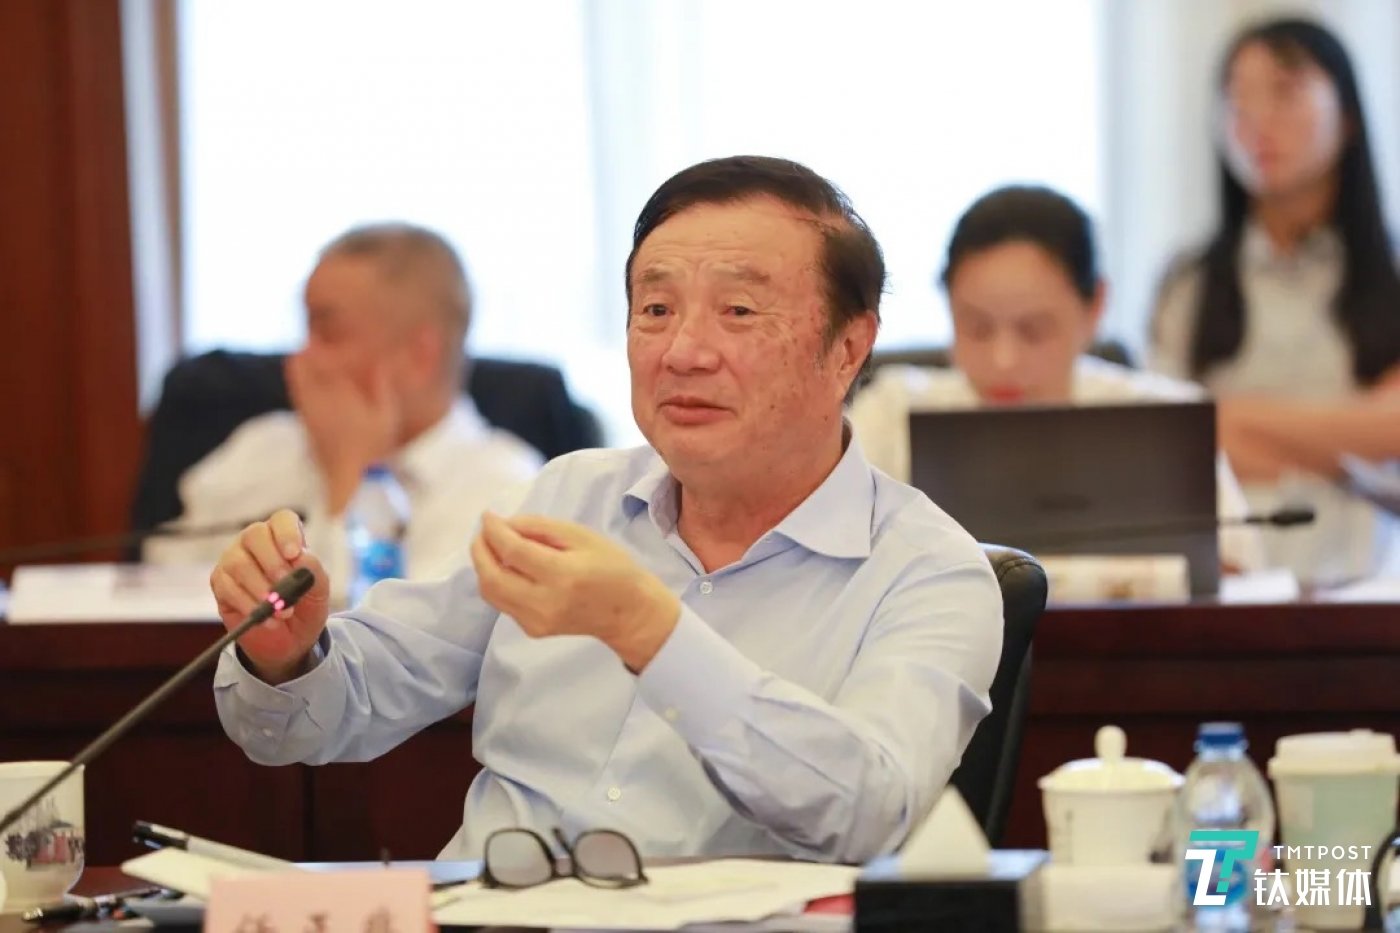 Huawei Founder's LT Vision for China: An Innovation Hub